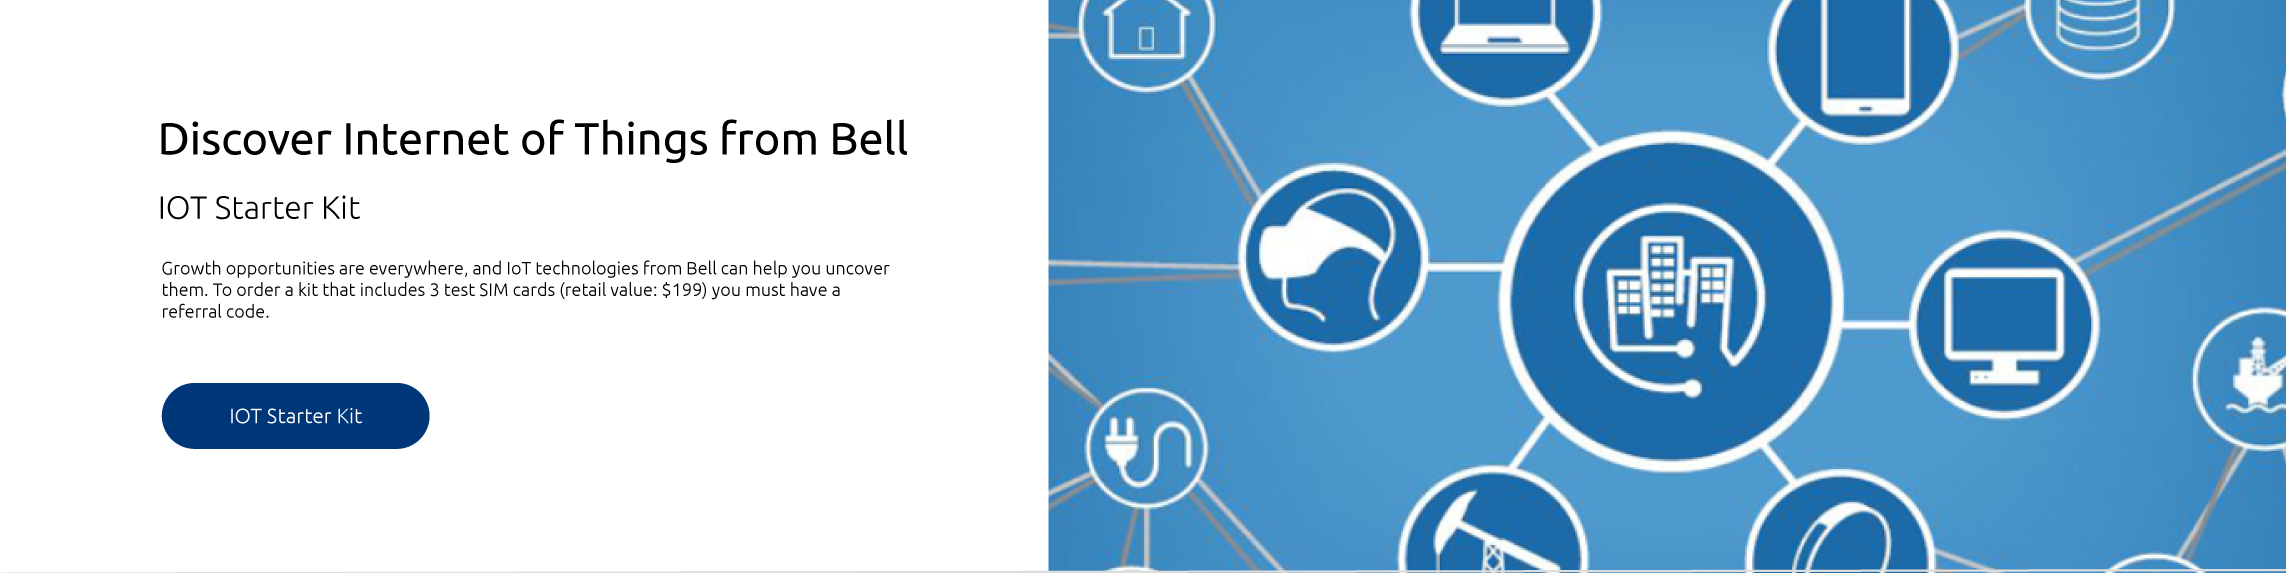 Discover Internet of Things from Bell